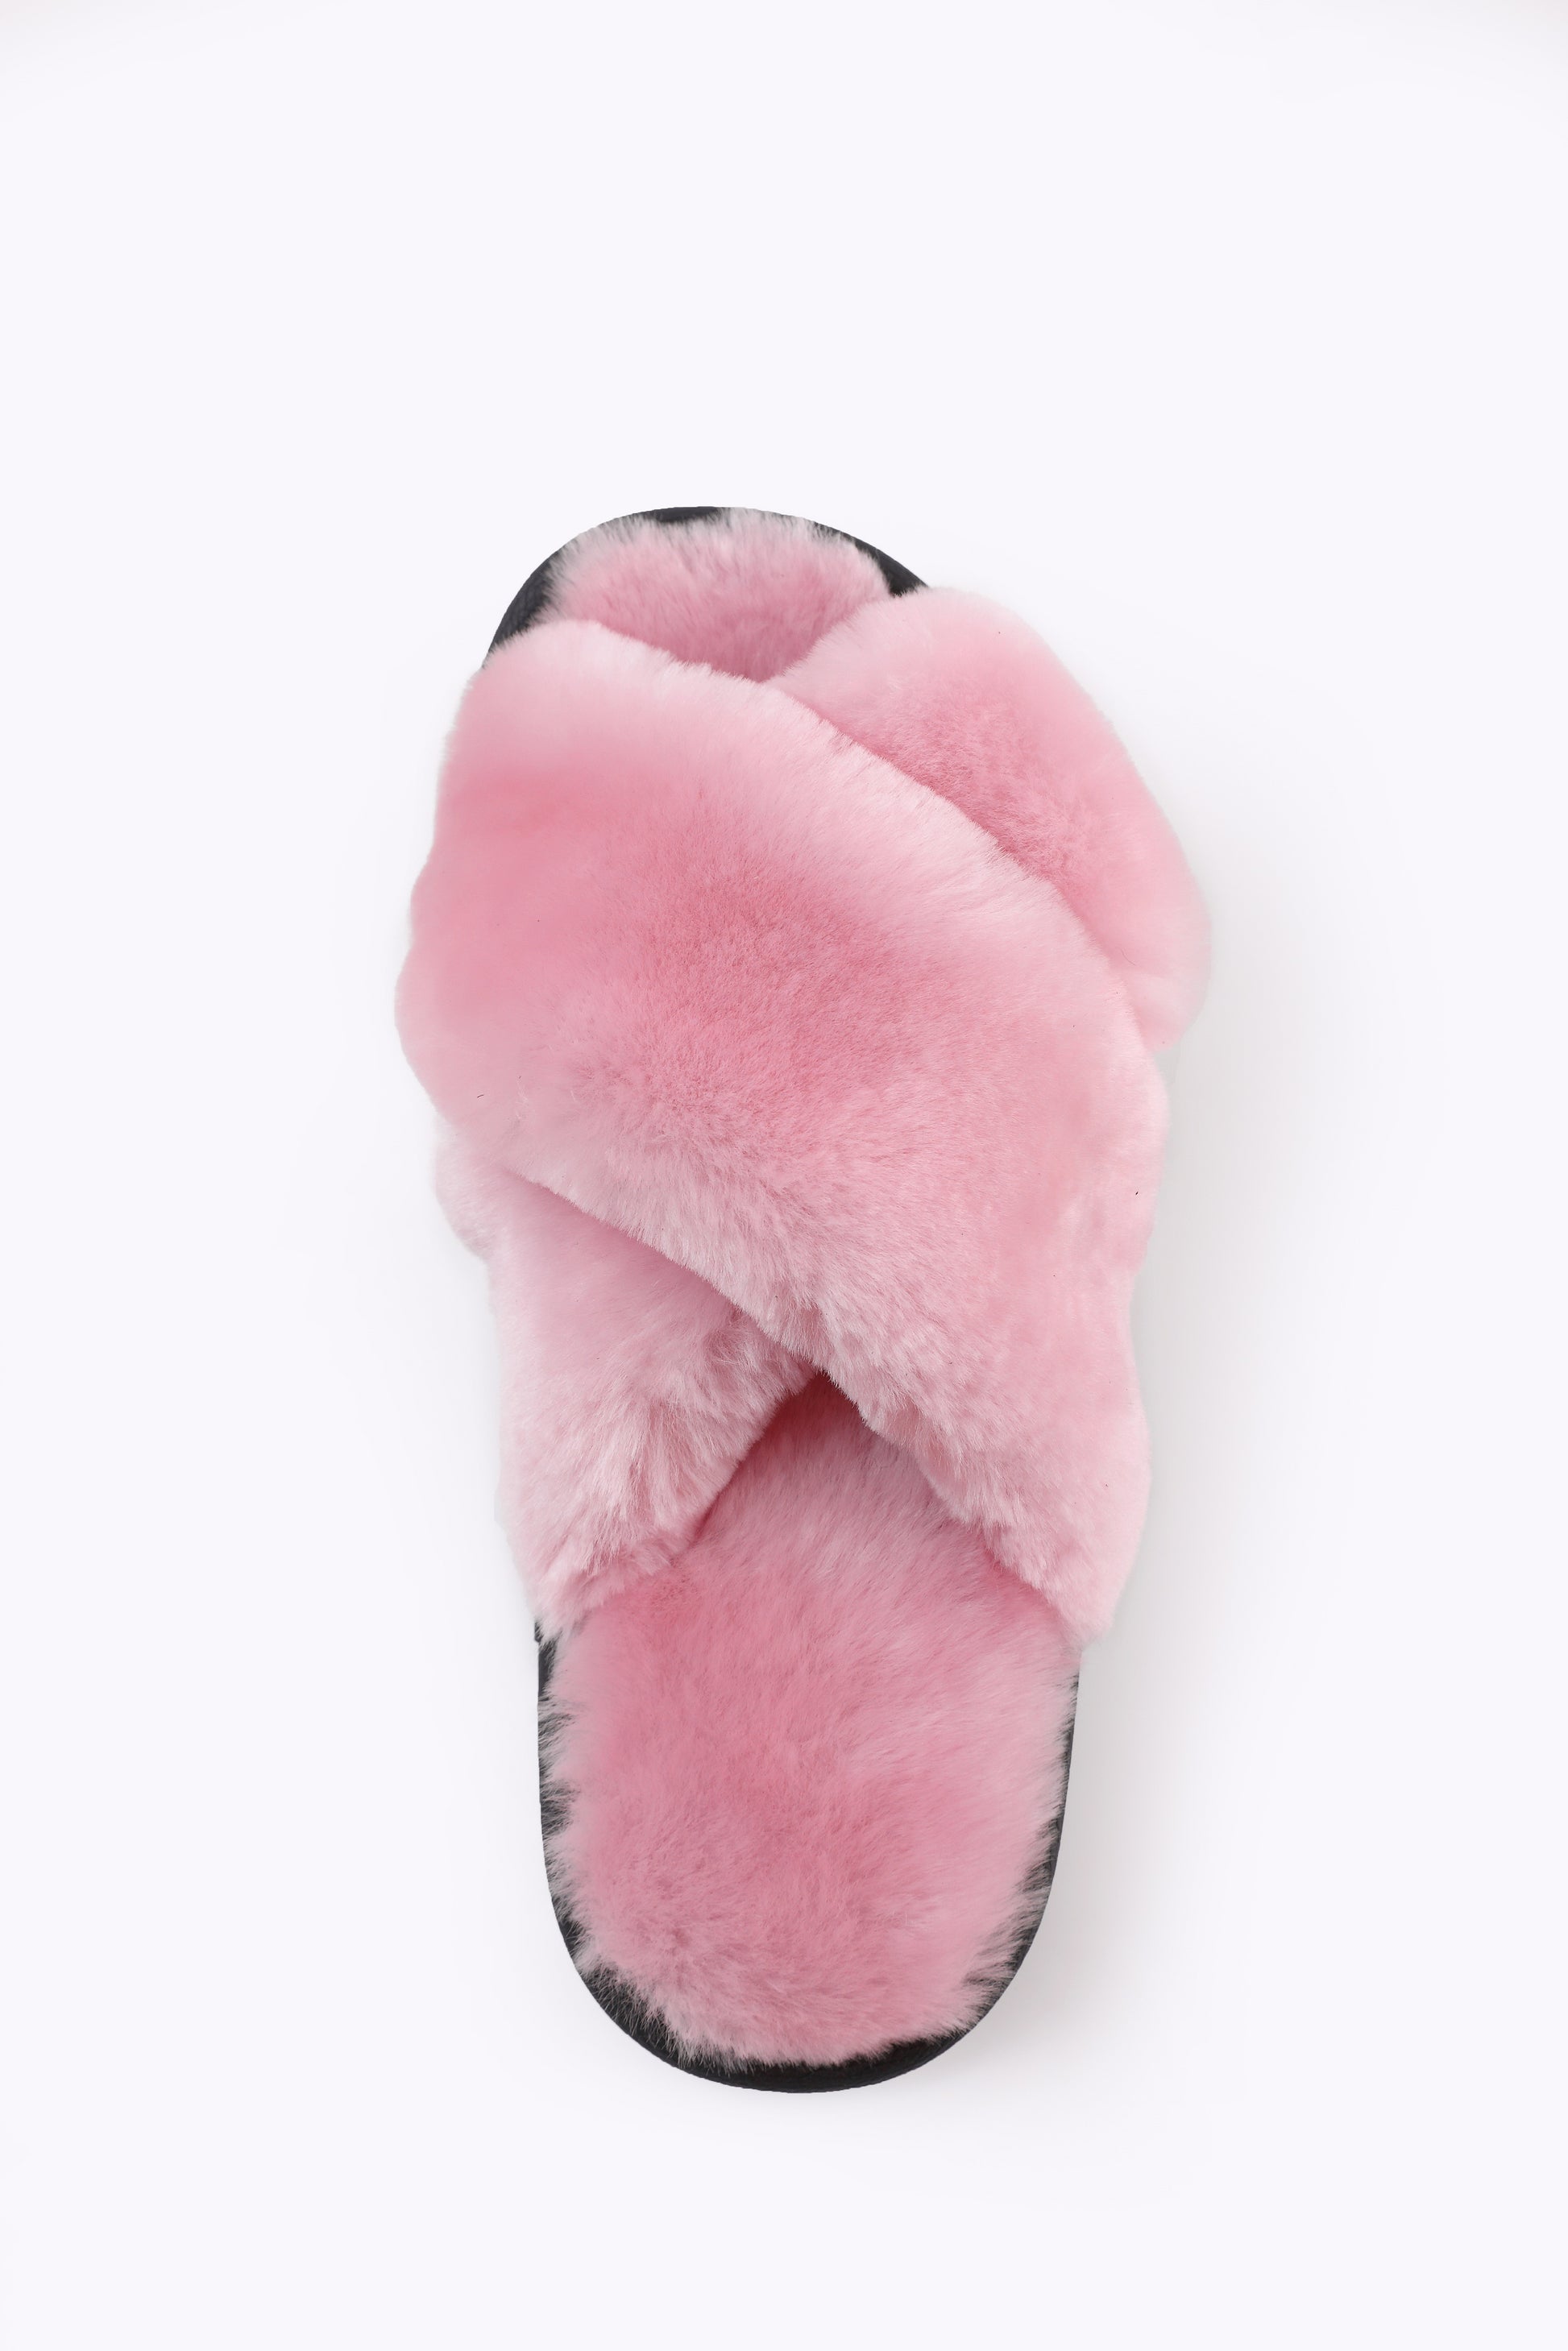 Soft Crossover Real Sheepskin Slippers for Women with Fur Lining in Pink Color